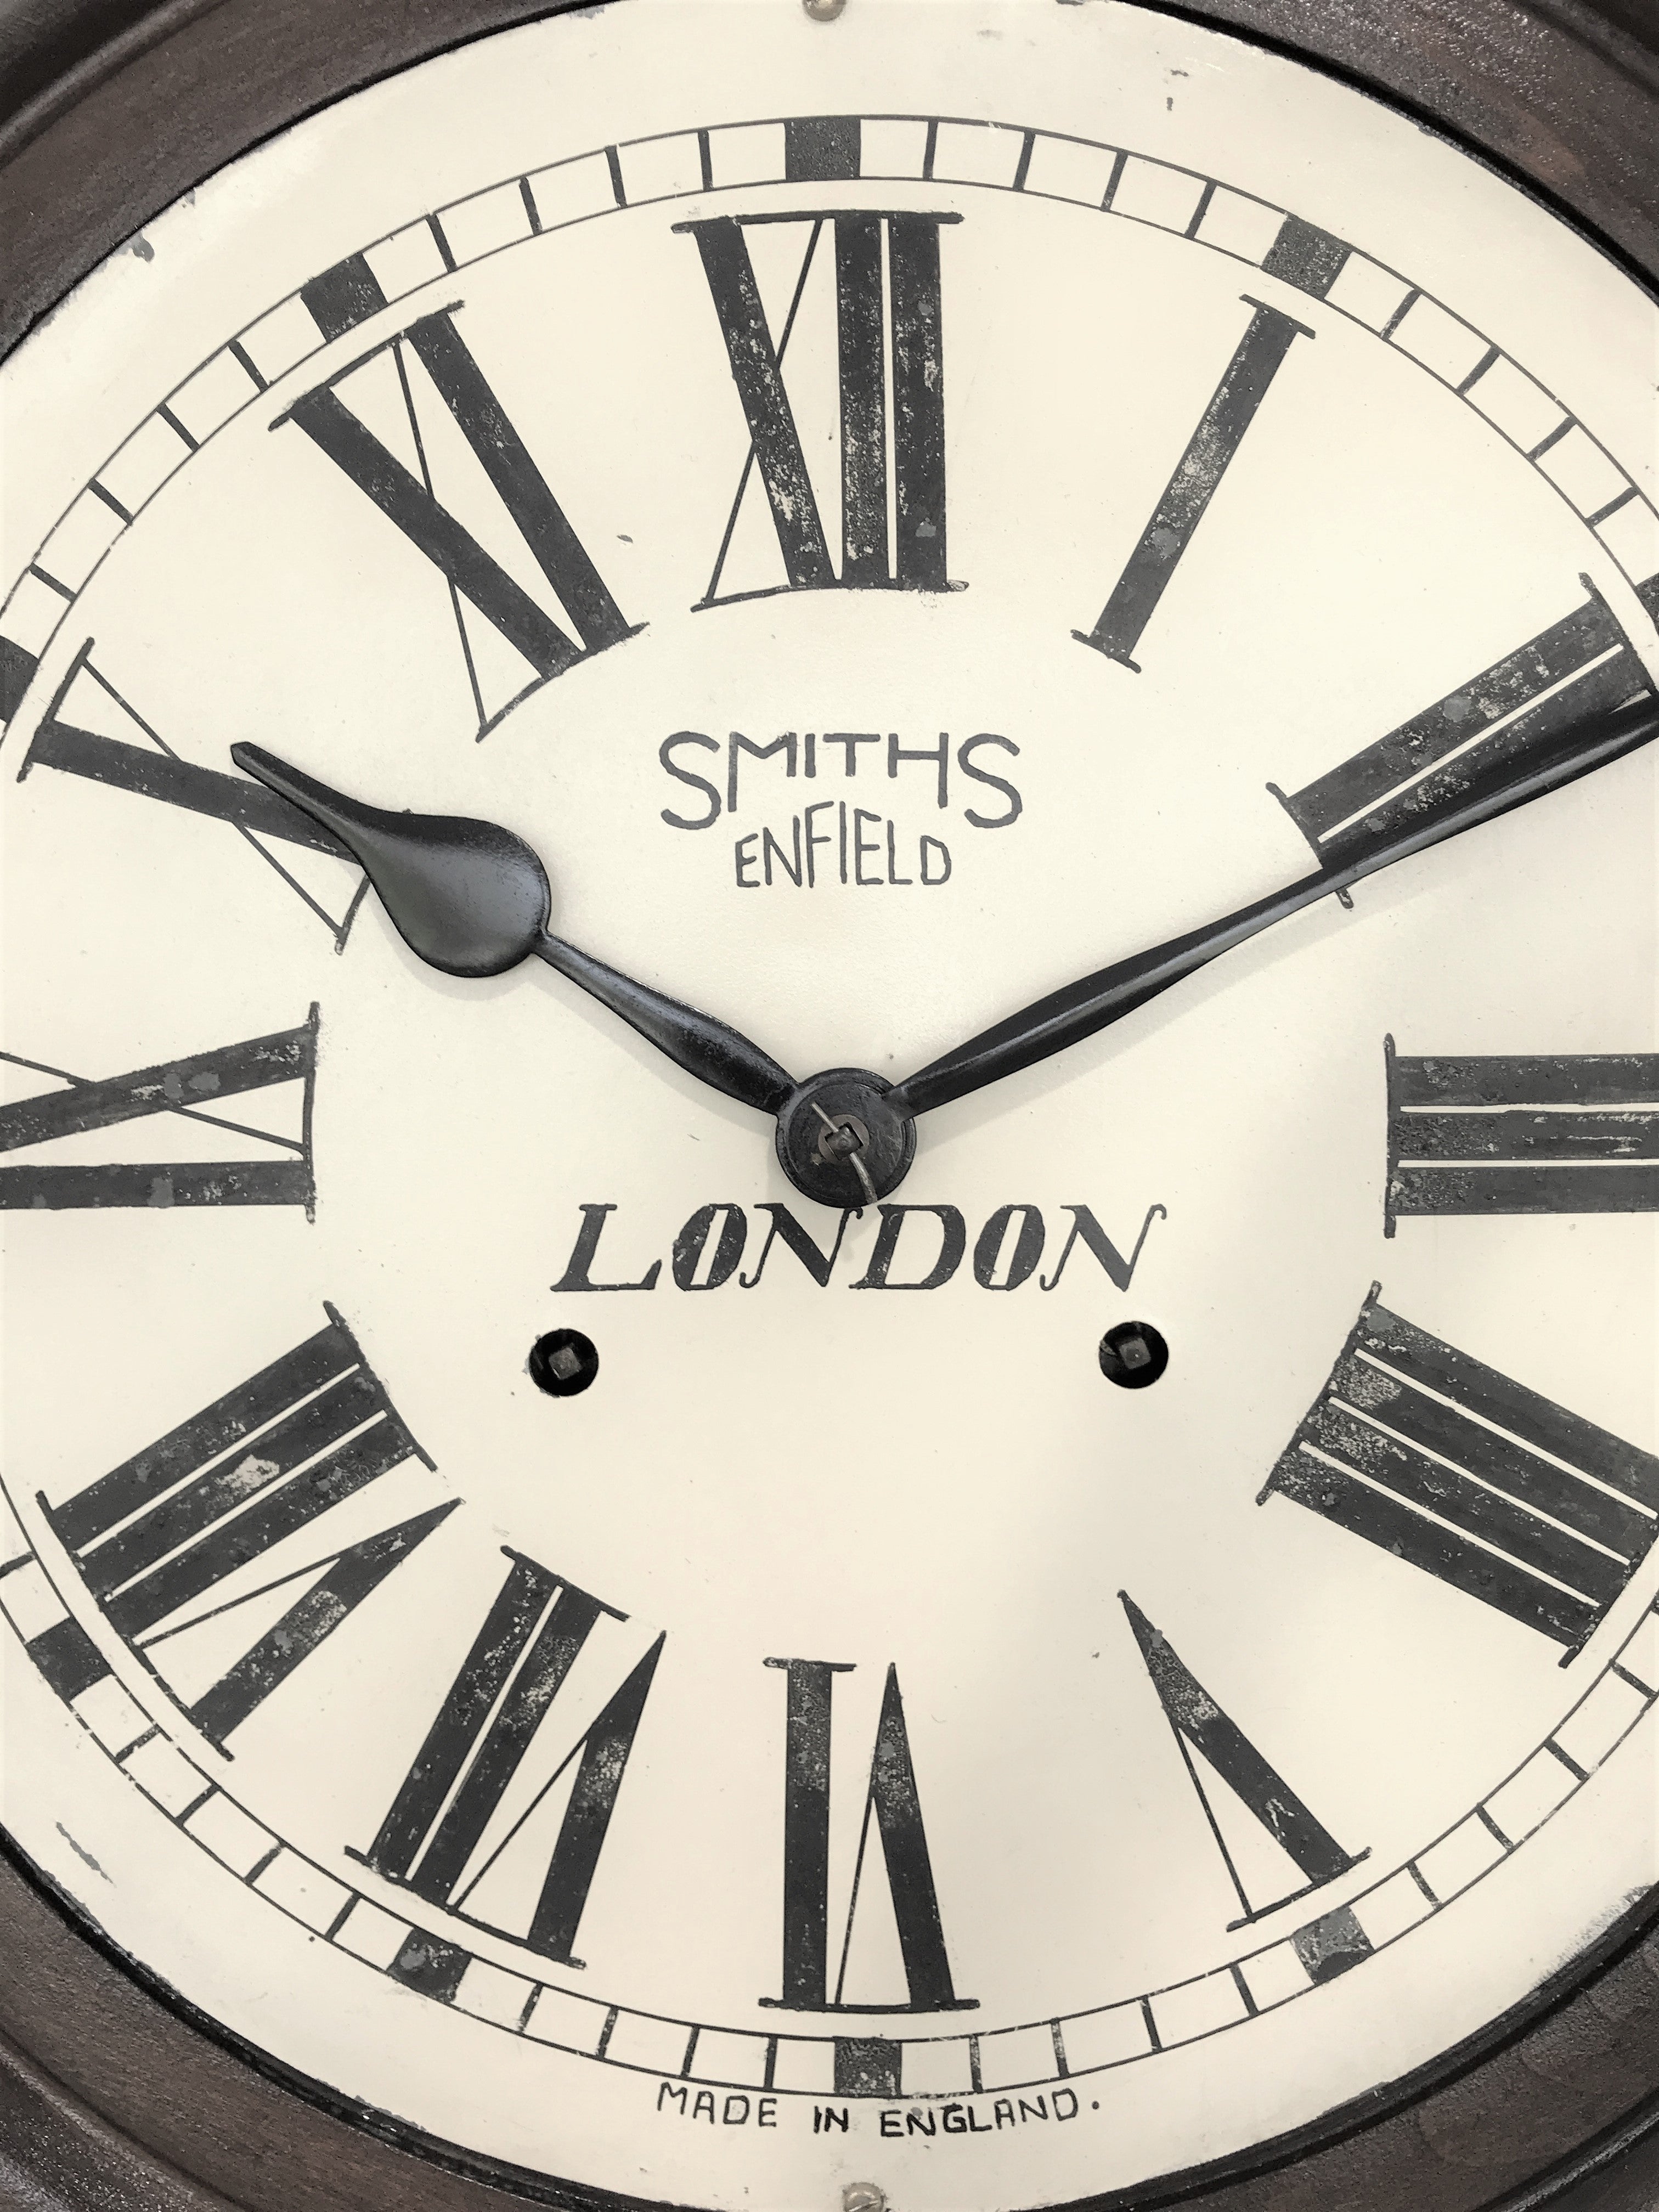 Antique London Station Wall Clock | eXibit collection